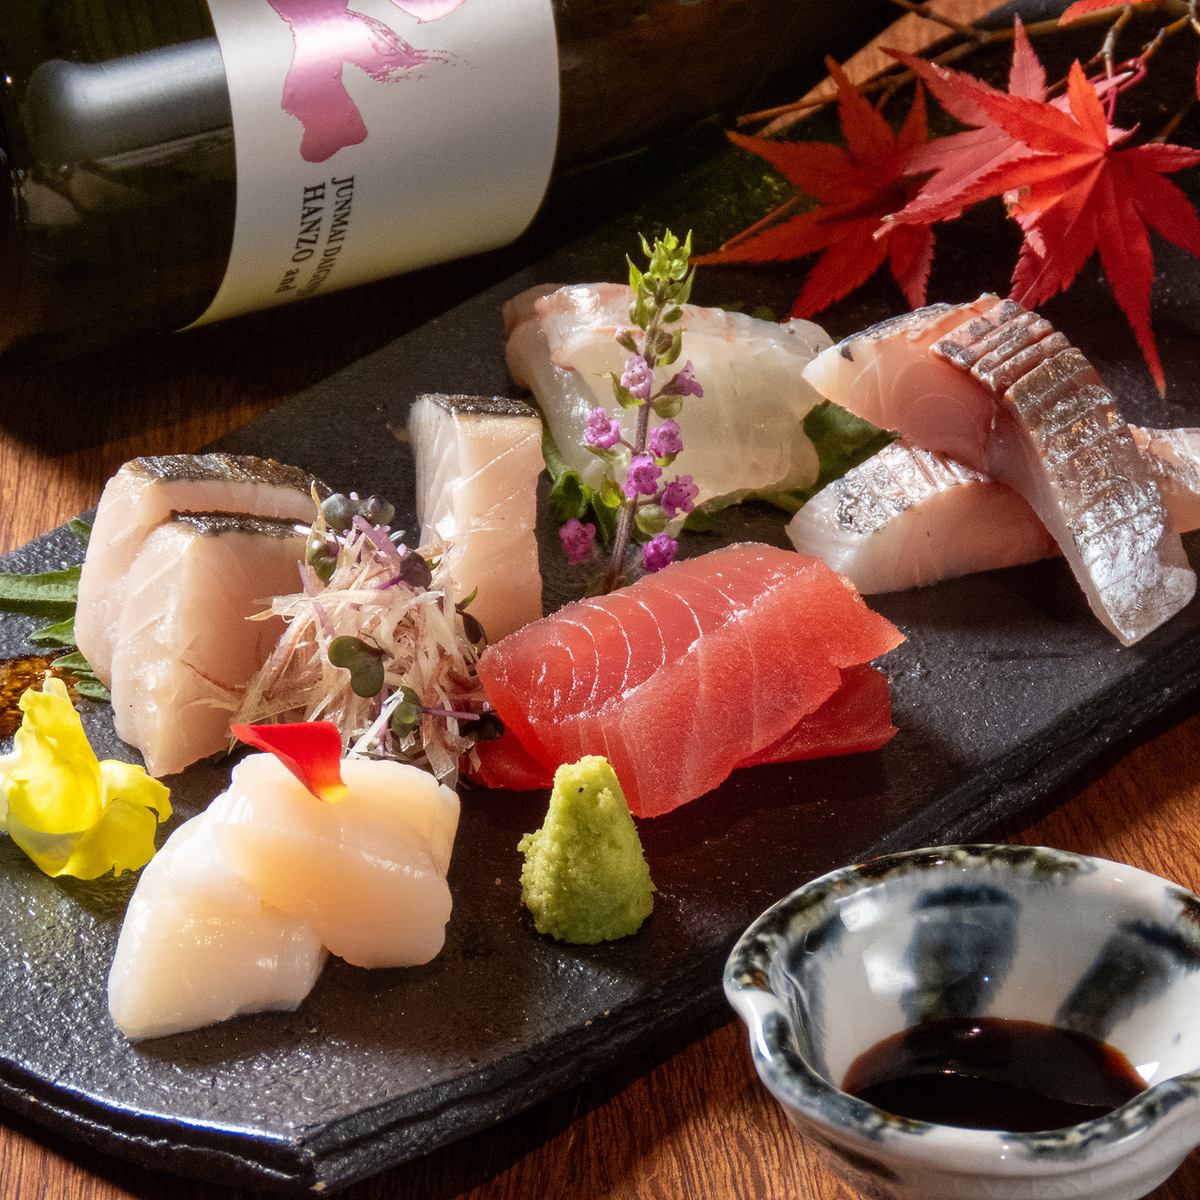 You can find truly delicious sashimi at our store! We only serve fresh and seasonal sashimi.